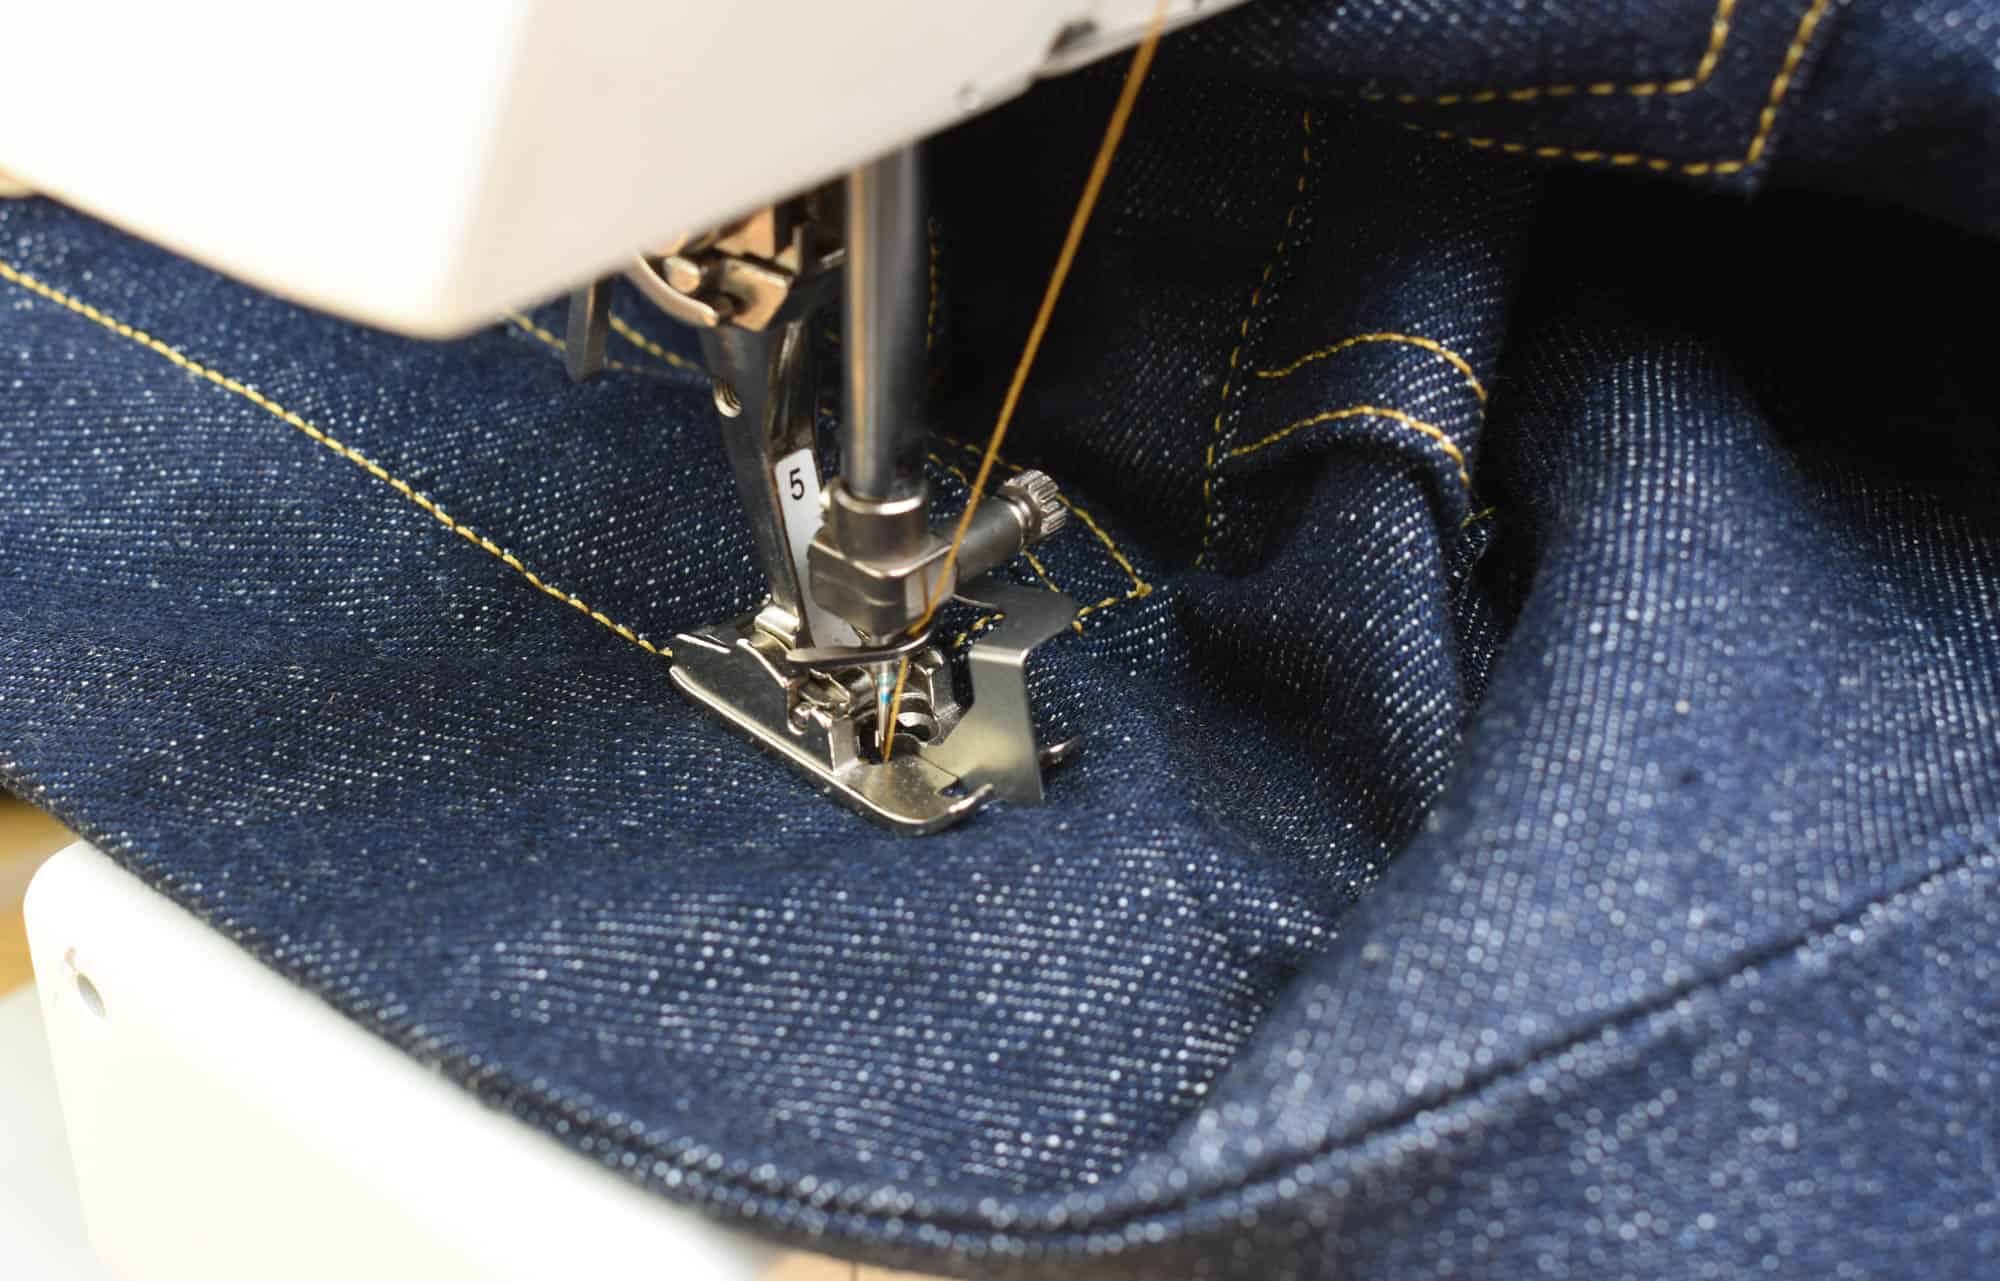 Sewing a jeans waistband tutorial